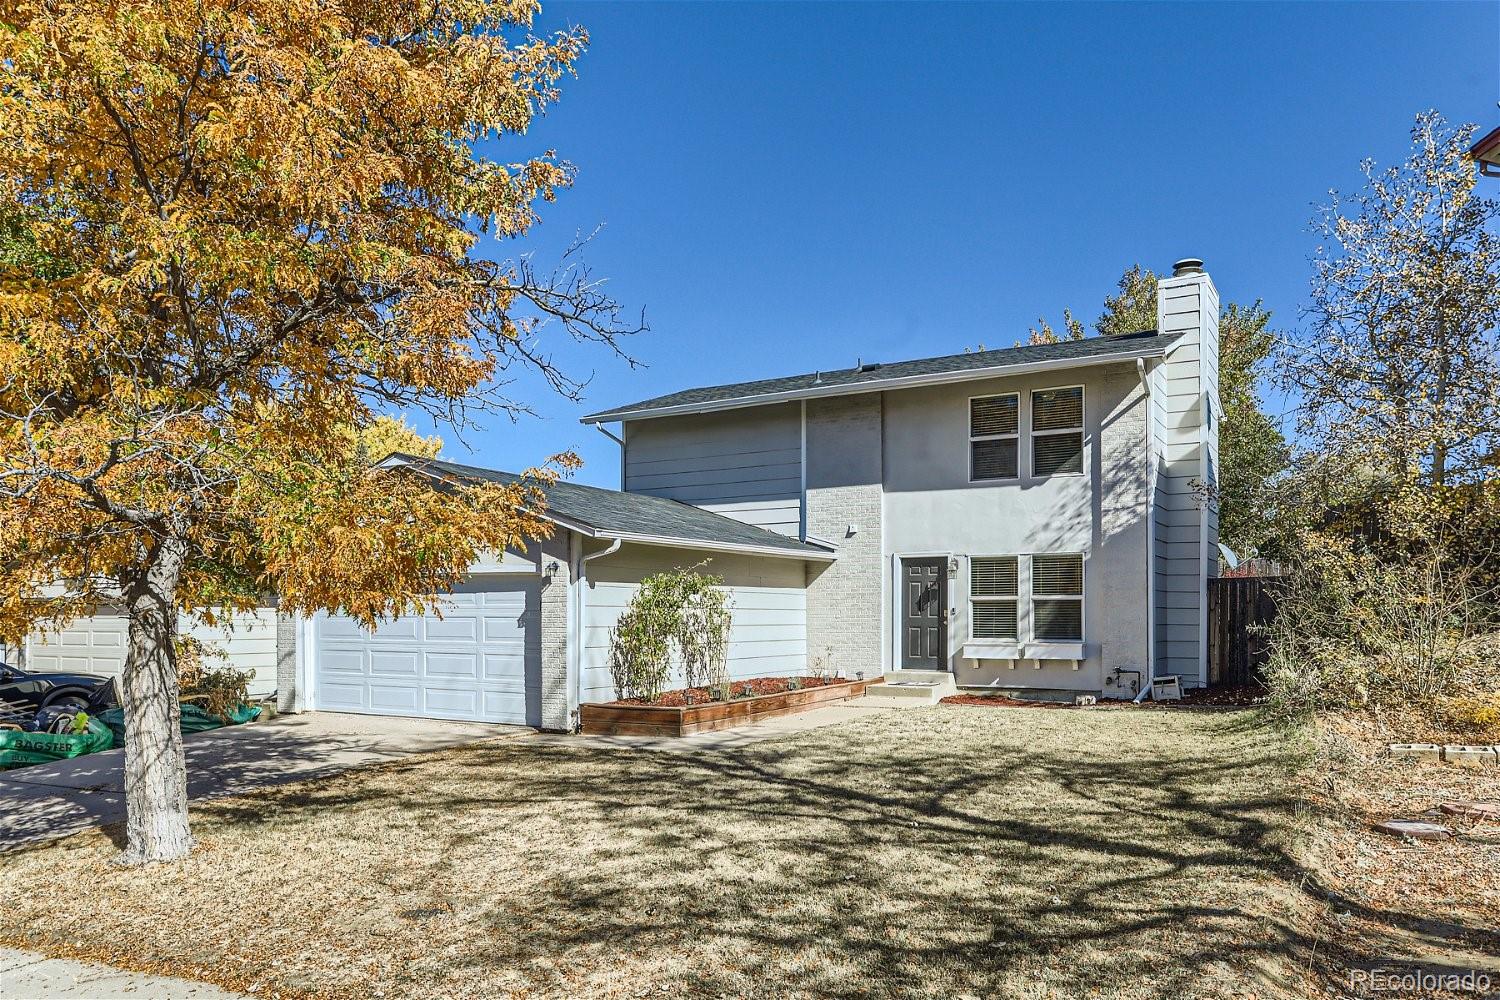 3856 s olathe circle, Aurora sold home. Closed on 2024-04-26 for $505,000.